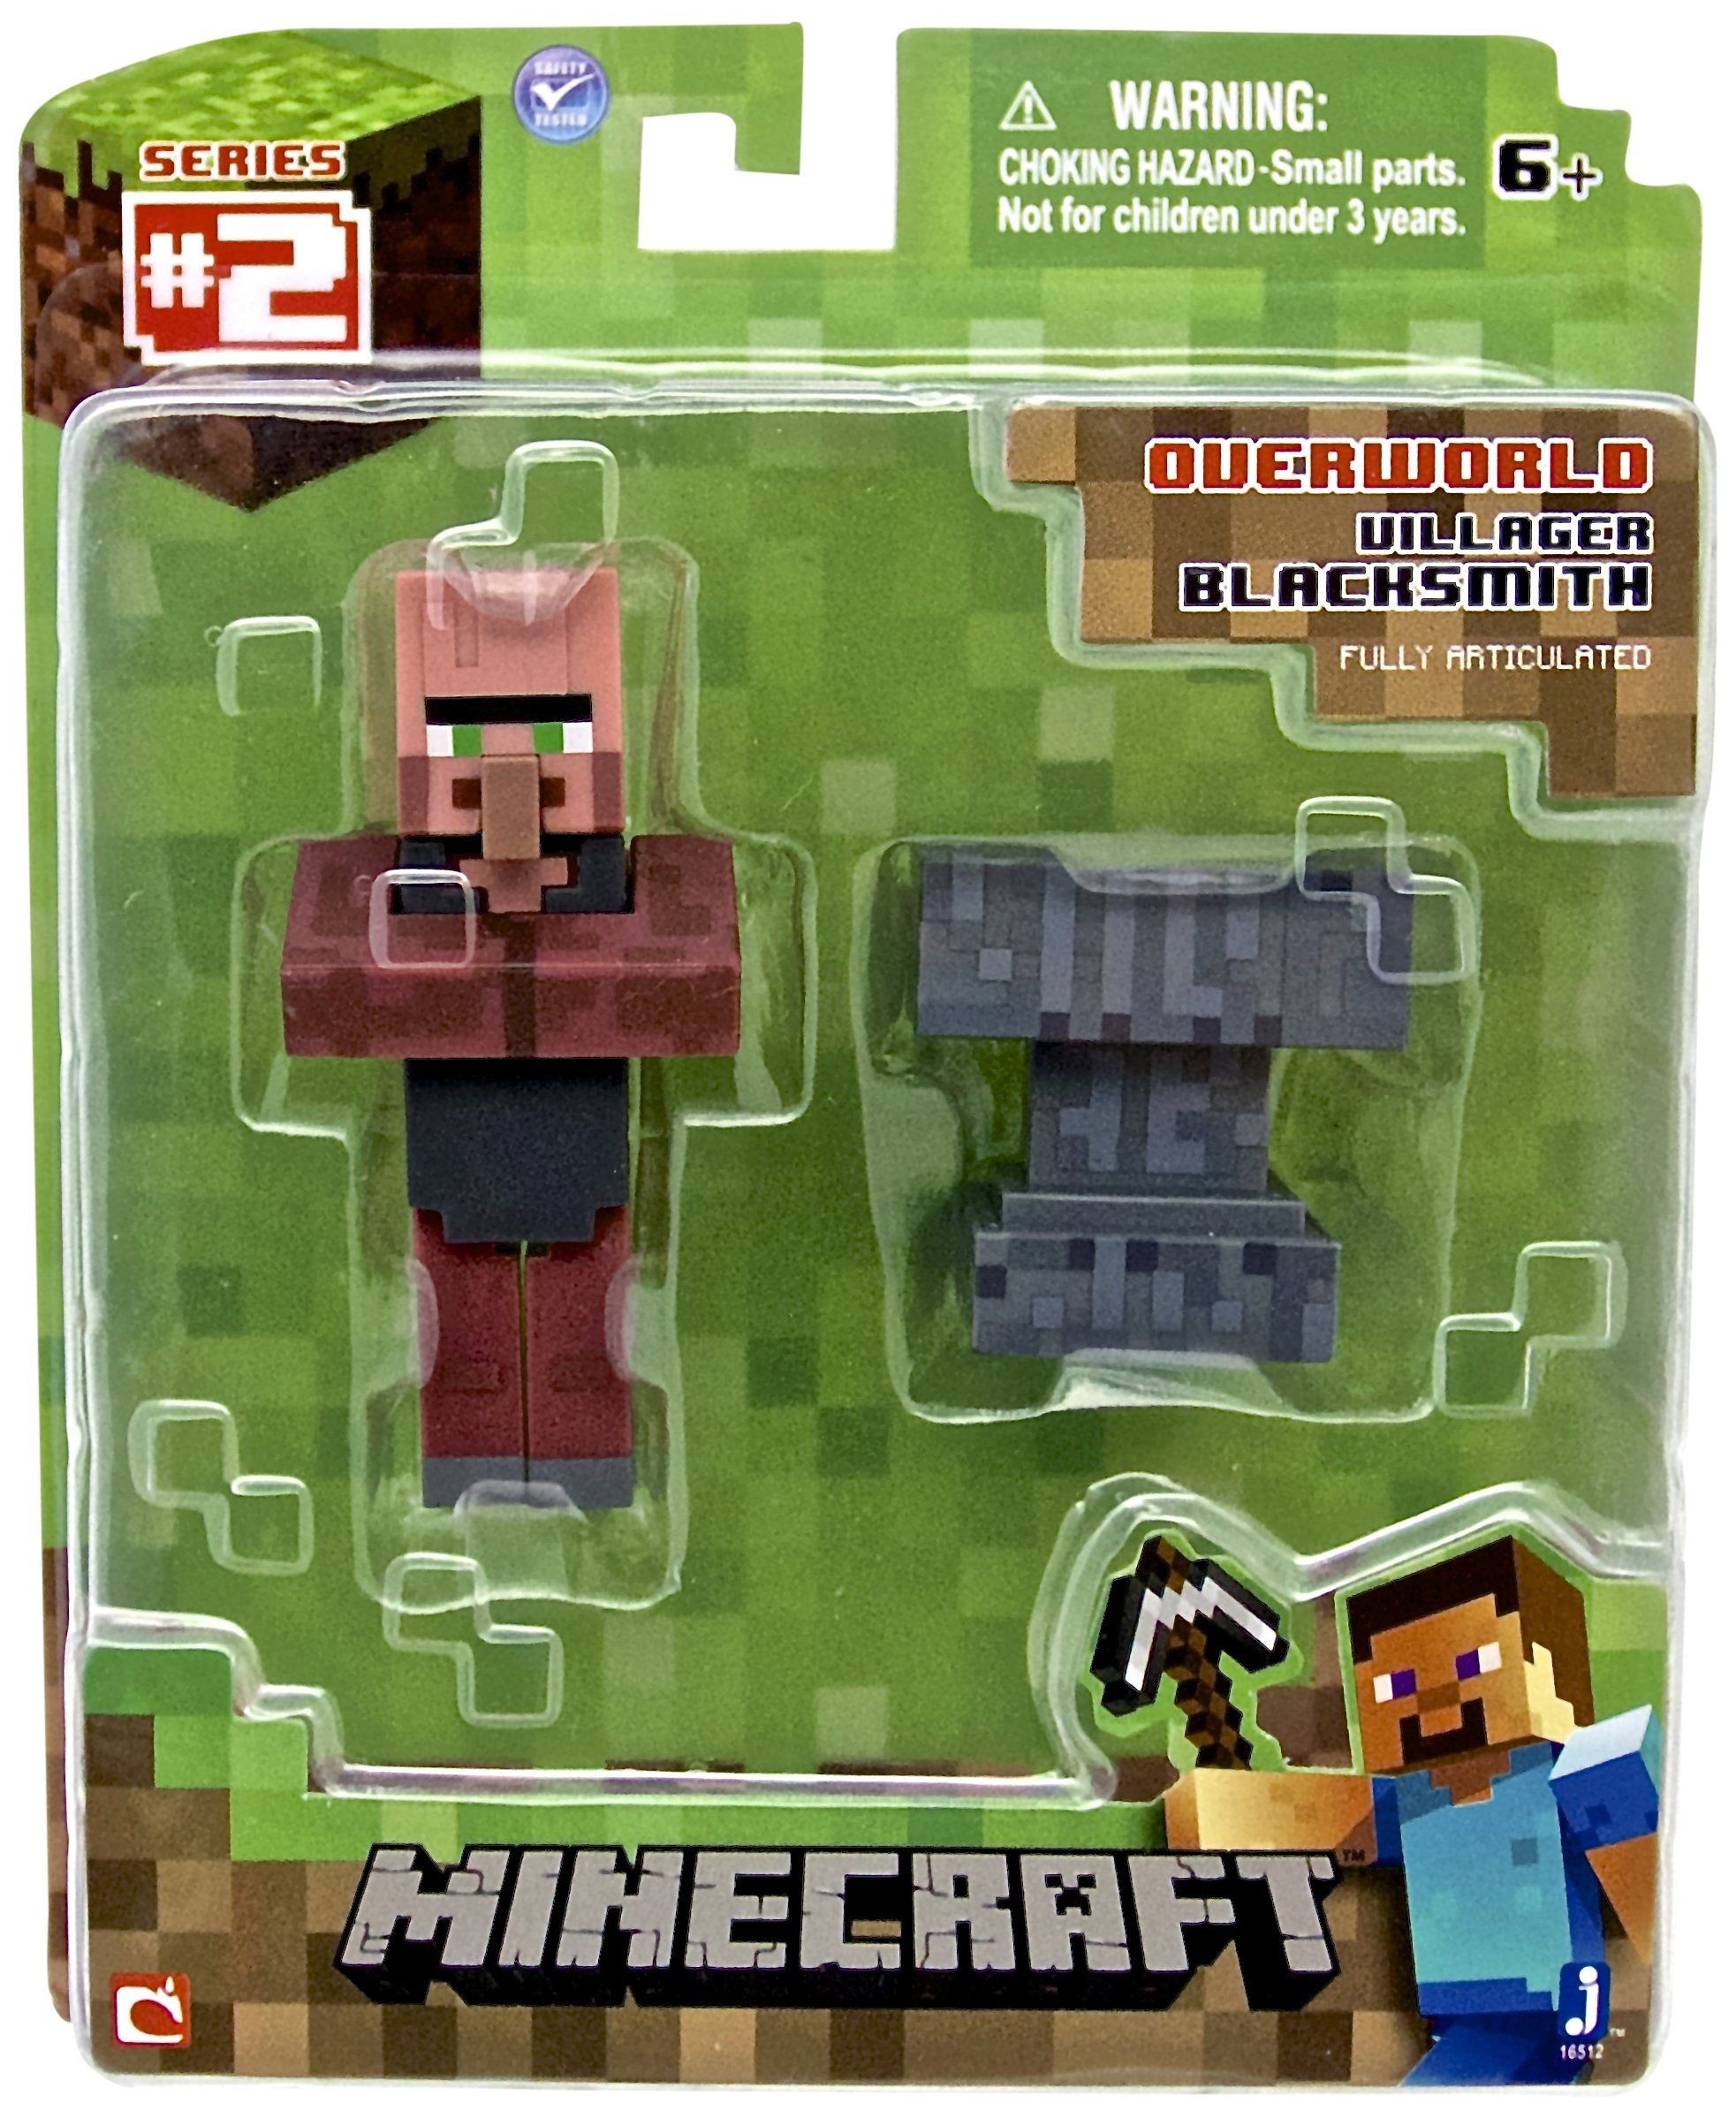 Minecraft Papercraft Overworld Deluxe Set Minecraft Series 2 Blacksmith Villager with Accessory 3" Action